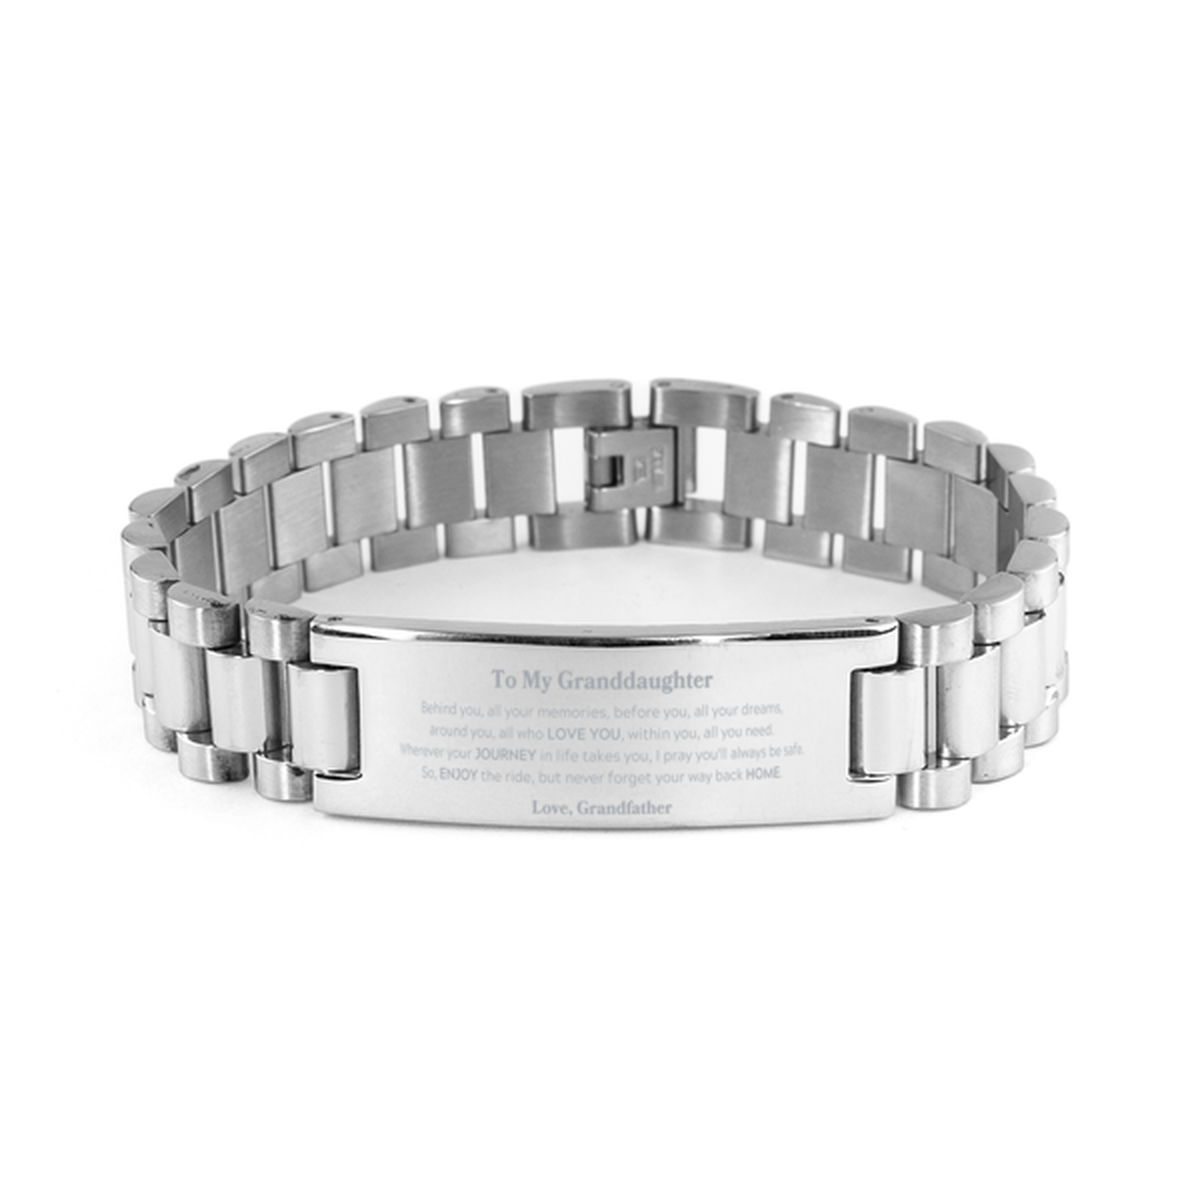 To My Granddaughter Graduation Gifts from Grandfather, Granddaughter Ladder Stainless Steel Bracelet Christmas Birthday Gifts for Granddaughter Behind you, all your memories, before you, all your dreams. Love, Grandfather